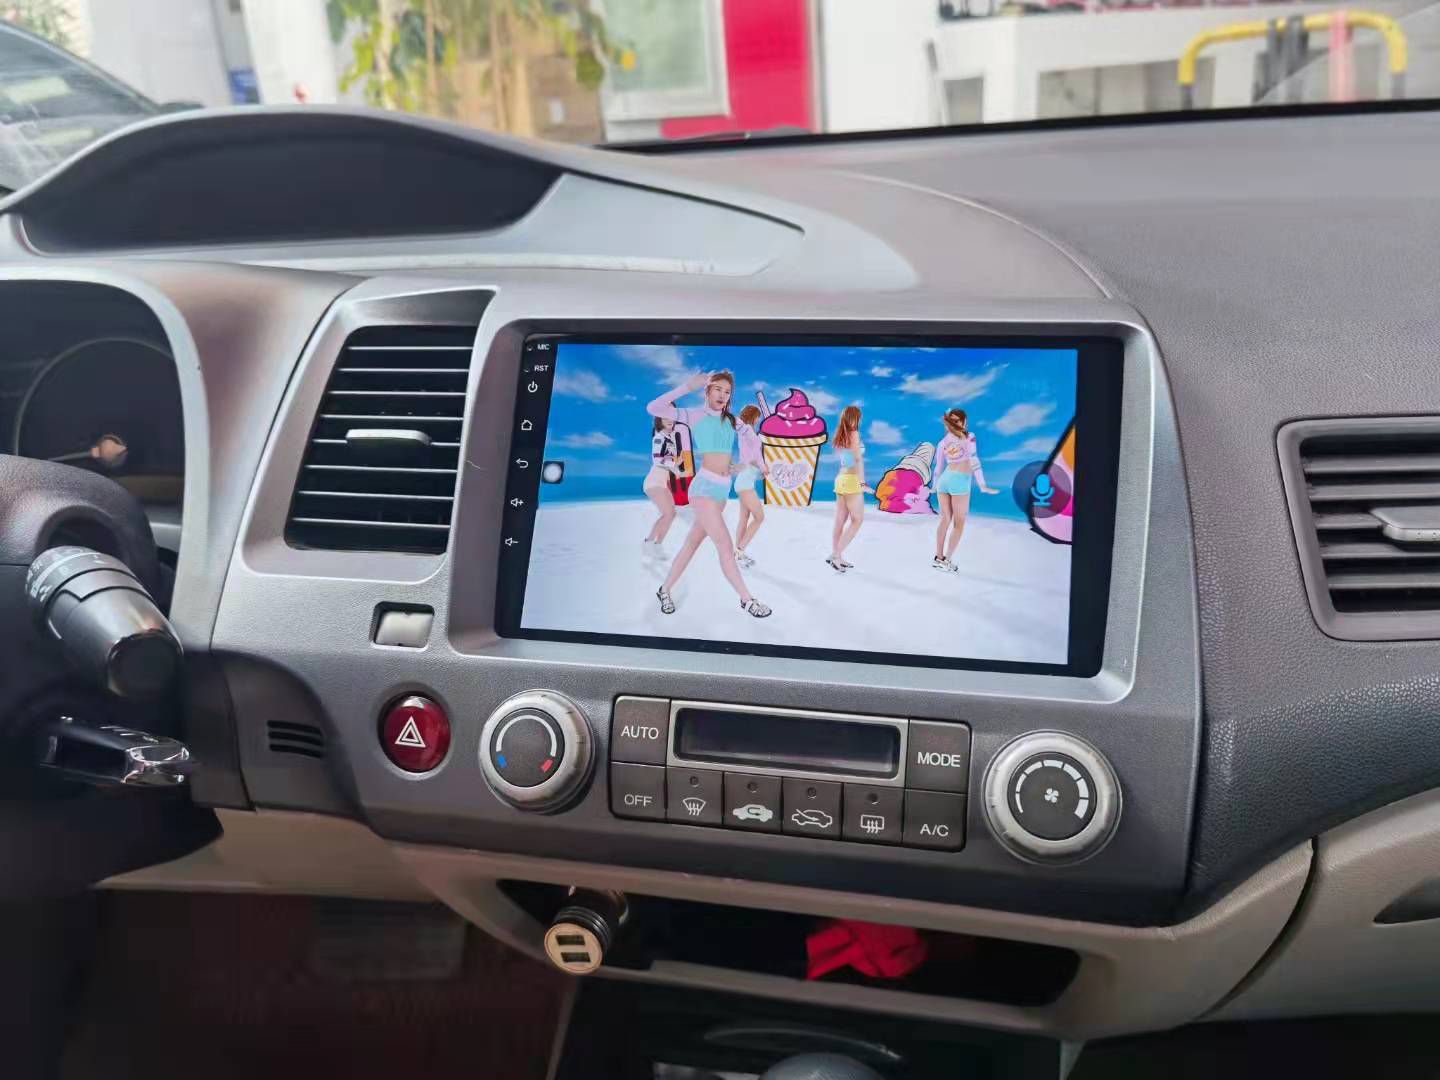 Honda Civic hybride 2007-2011 10.1 inch navigatie carkit android 10 apple carplay android auto